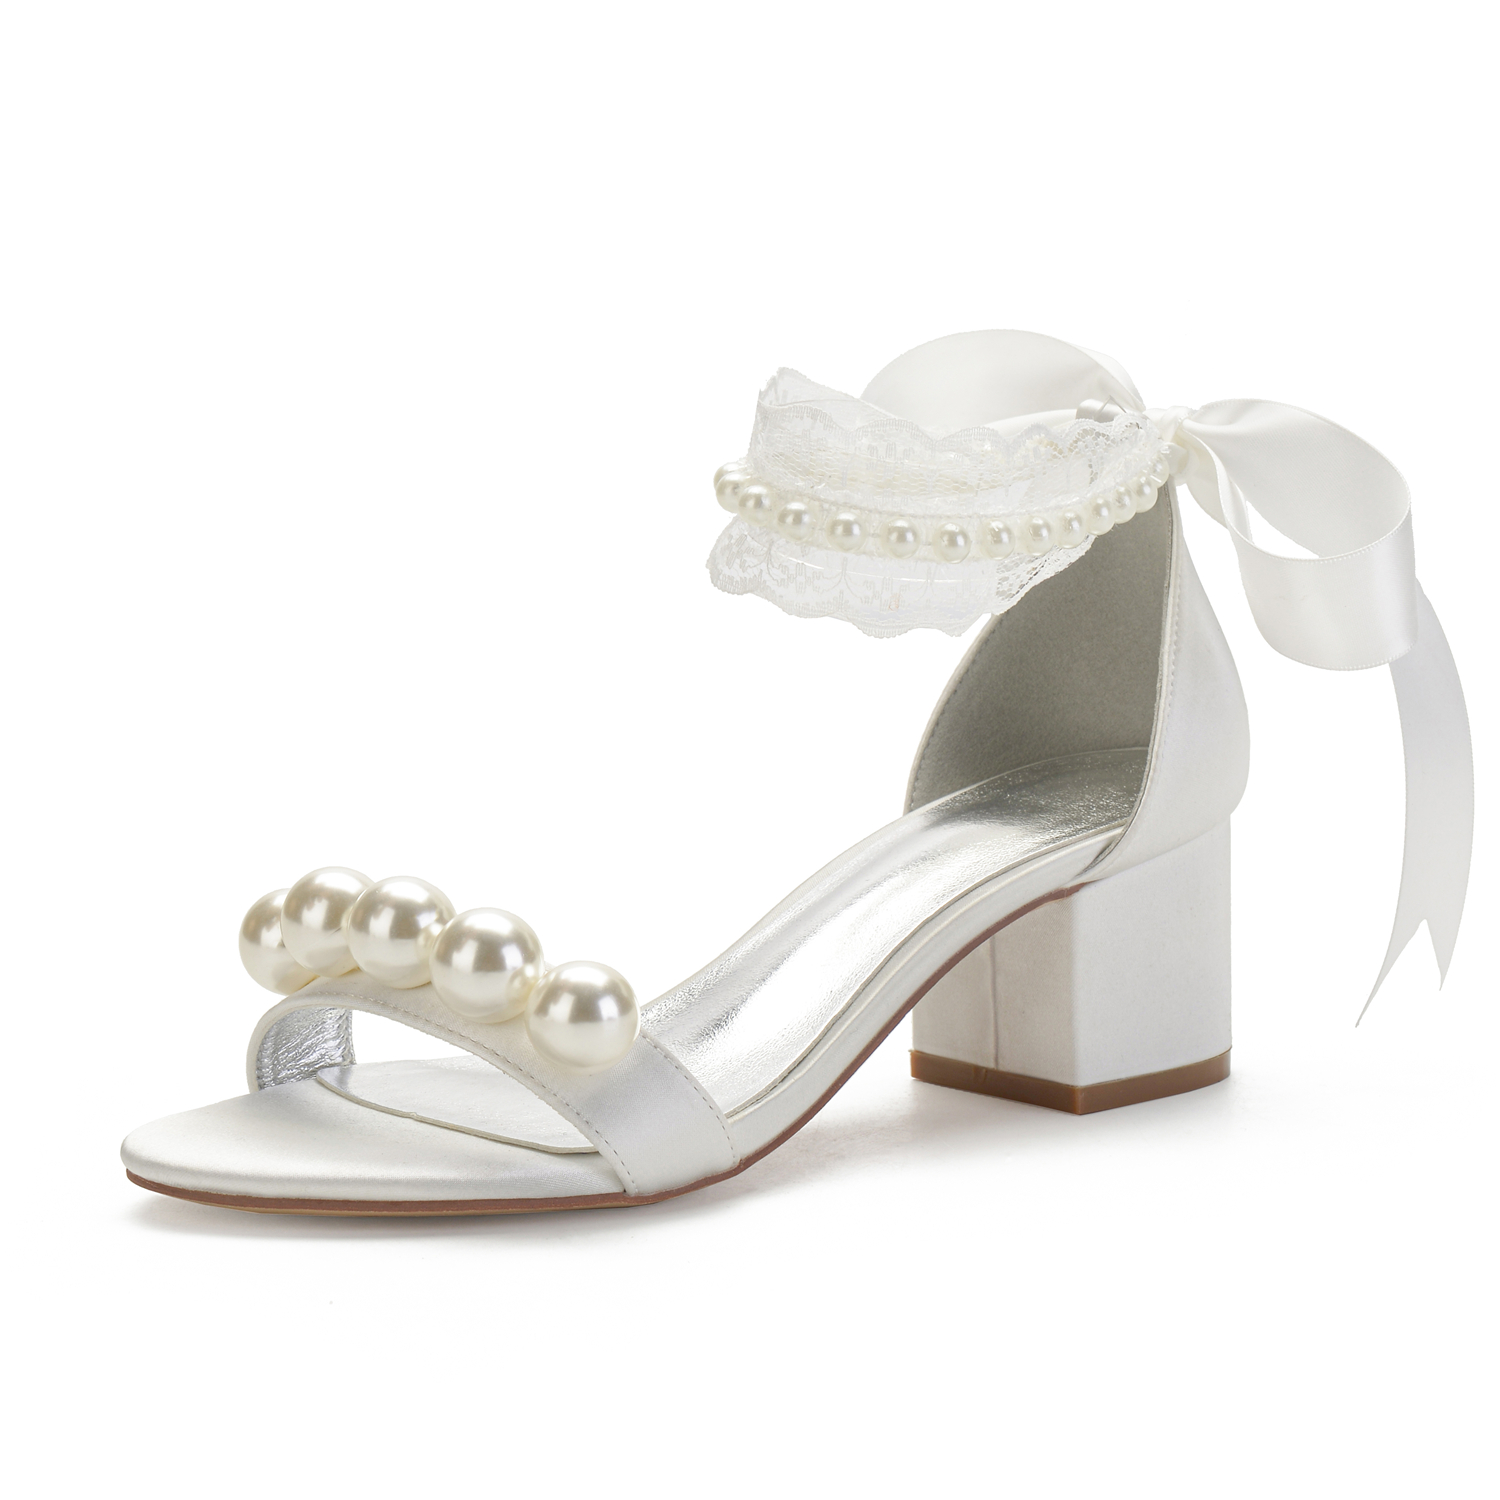 Elegant white ivory bridal shoes satin wedding sandals lower block thick heels pearl lace ankle strap vintage wedding shoes